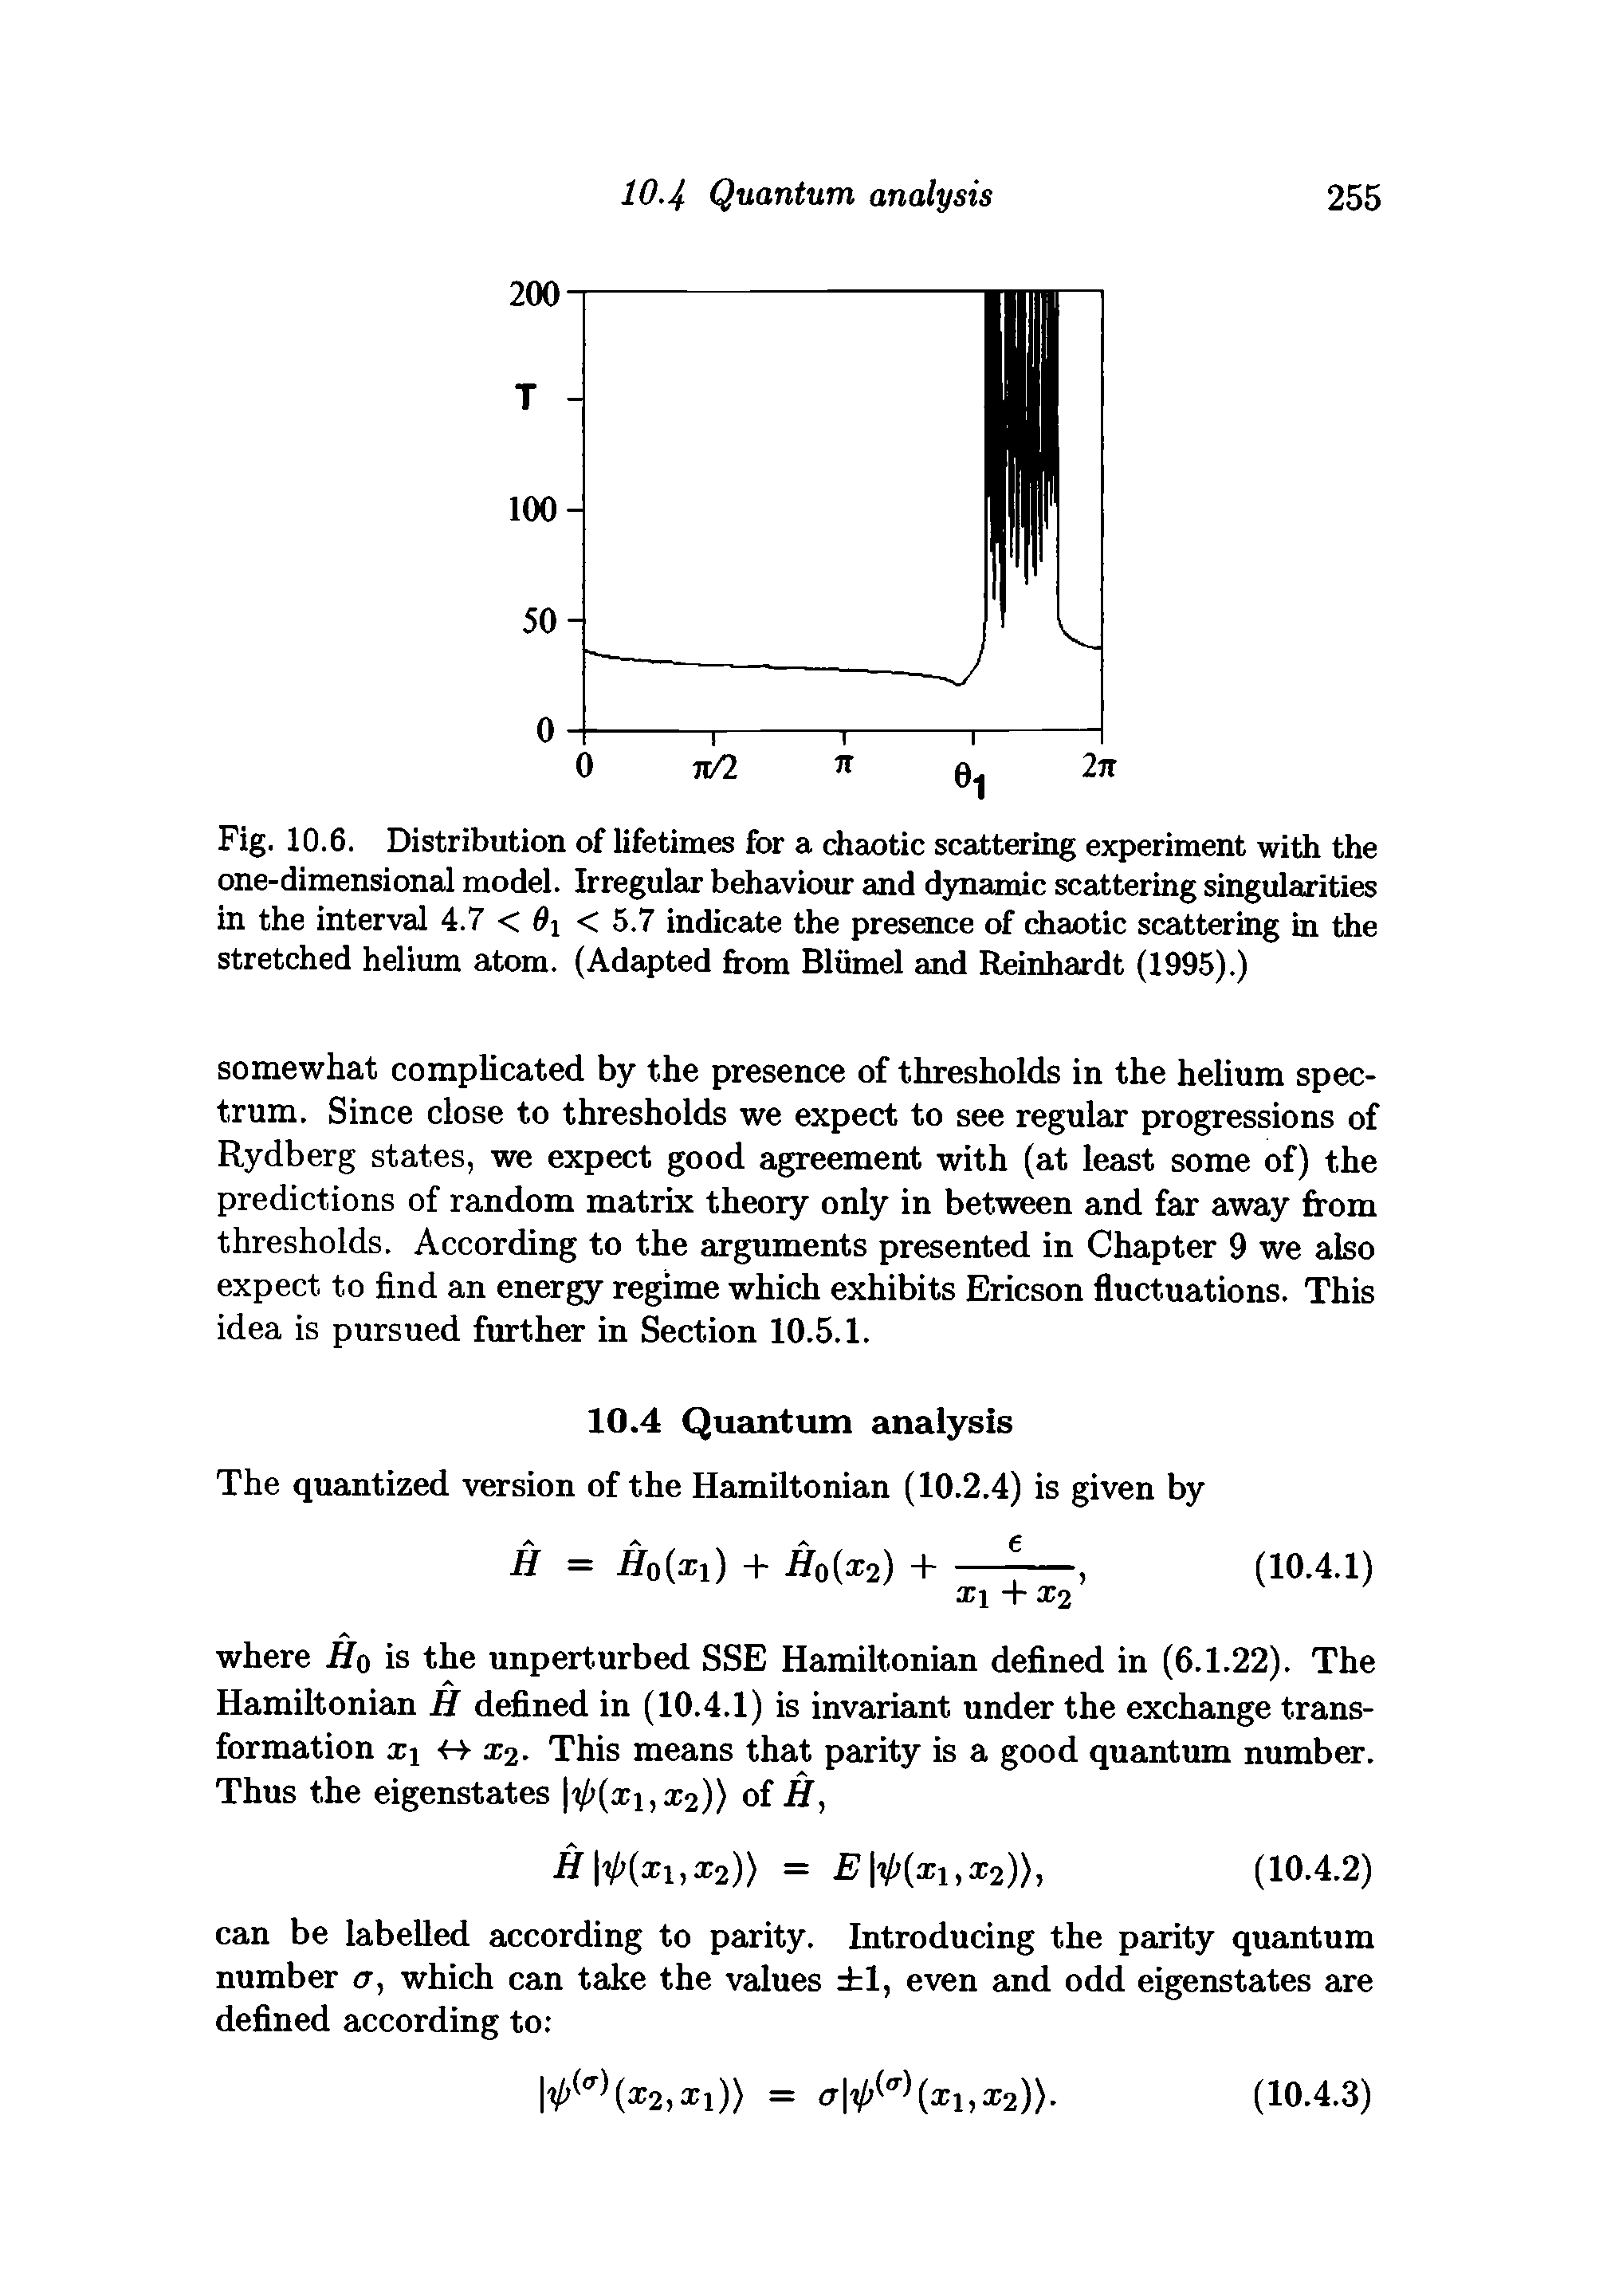 Fig. 10.6. Distribution of lifetimes for a chaotic scattering experiment with the one-dimensional model. Irregular behaviour and dynamic scattering singularities in the interval 4.7 < 6i < 5.7 indicate the presence of chaotic scattering in the stretched helium atom. (Adapted from Bliimel and Reinhardt (1995).)...